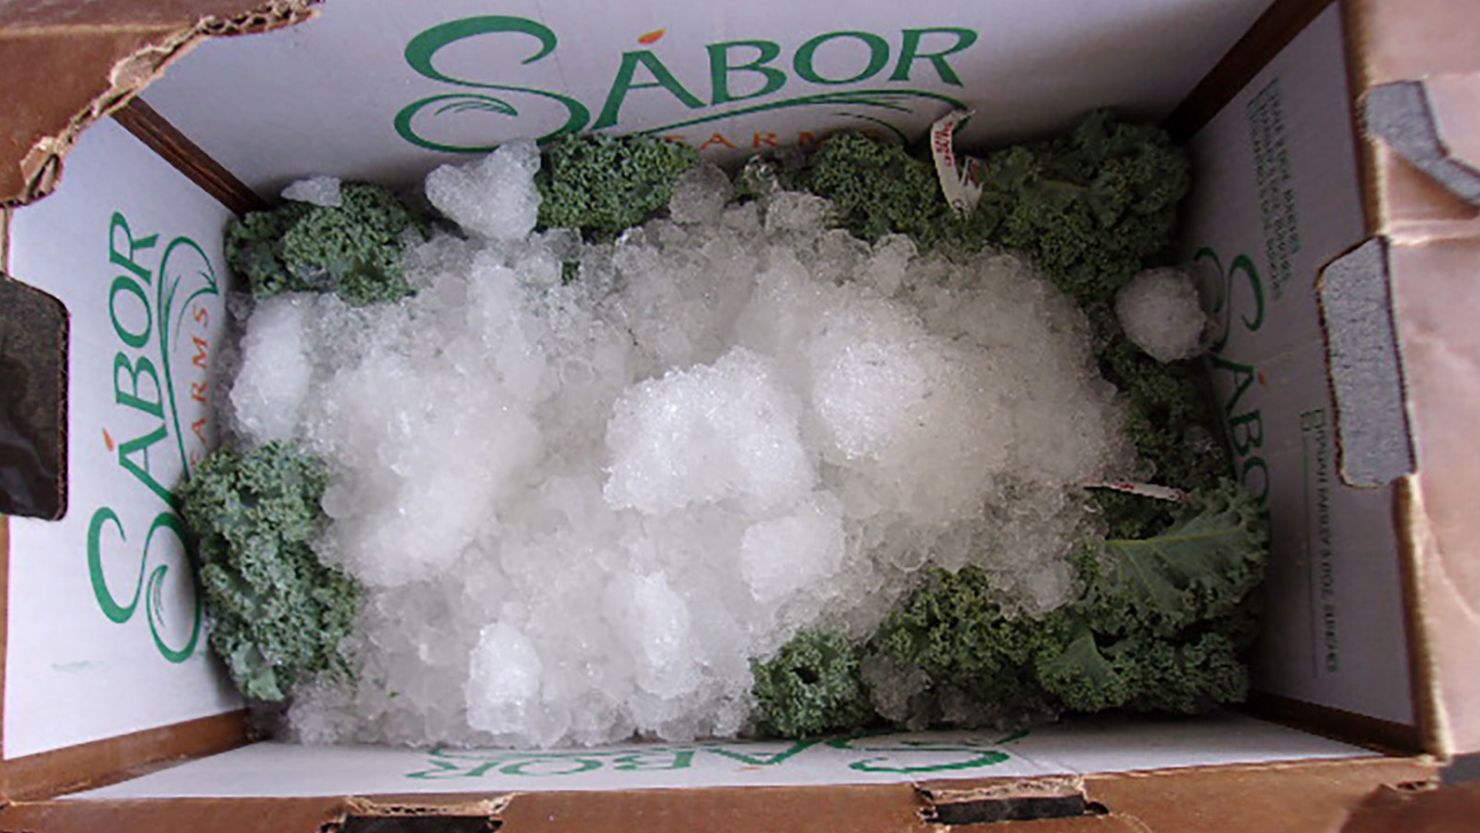 CBP officers seized $38 million worth of methamphetamine within a shipment of kale in Otay Mesa, California, according to US Customs and Border Protection.